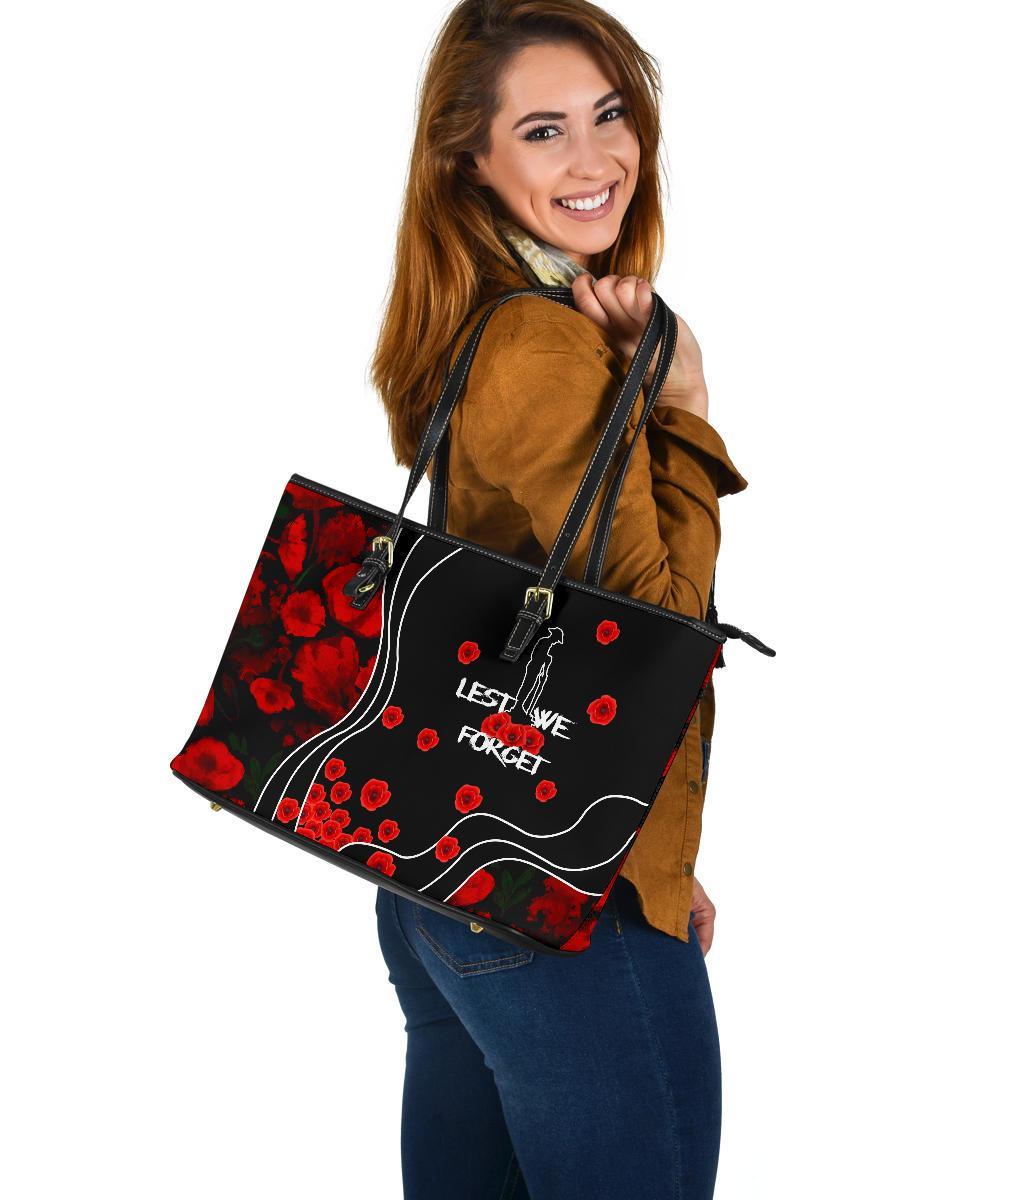 anzac-lest-we-forget-large-leather-tote-bag-poppy-flowers